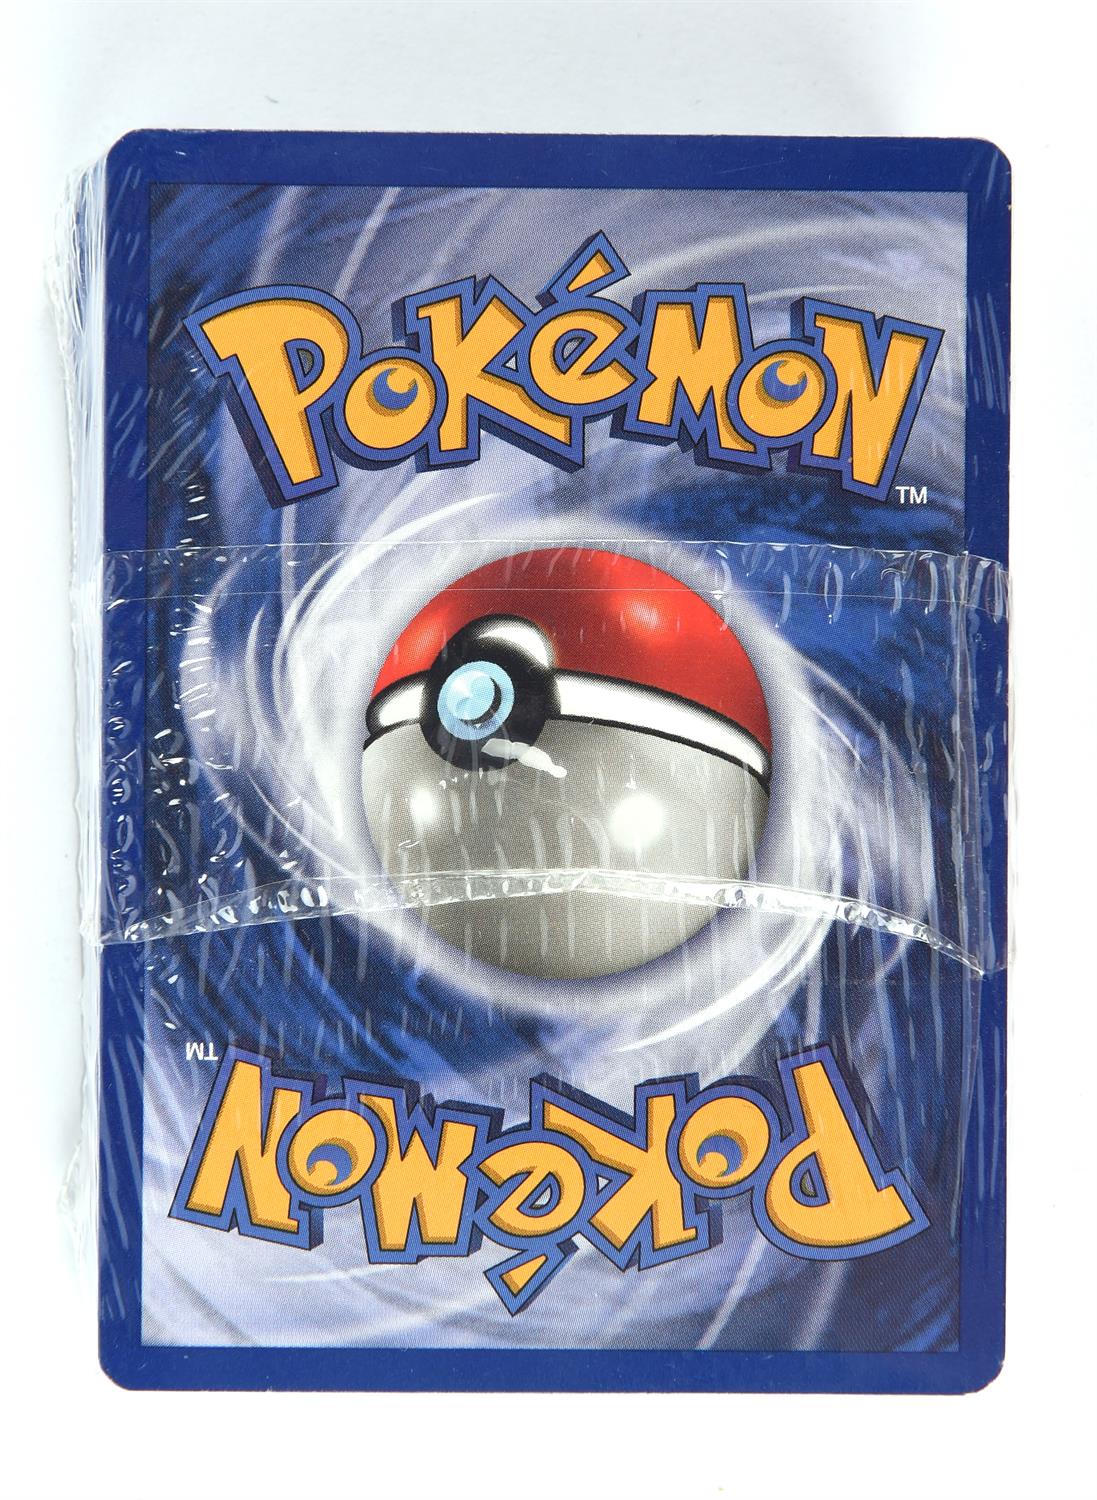 Pokemon TCG. Pokemon Zap Theme Deck. This item is without the outer box or counters but contains - Image 2 of 2